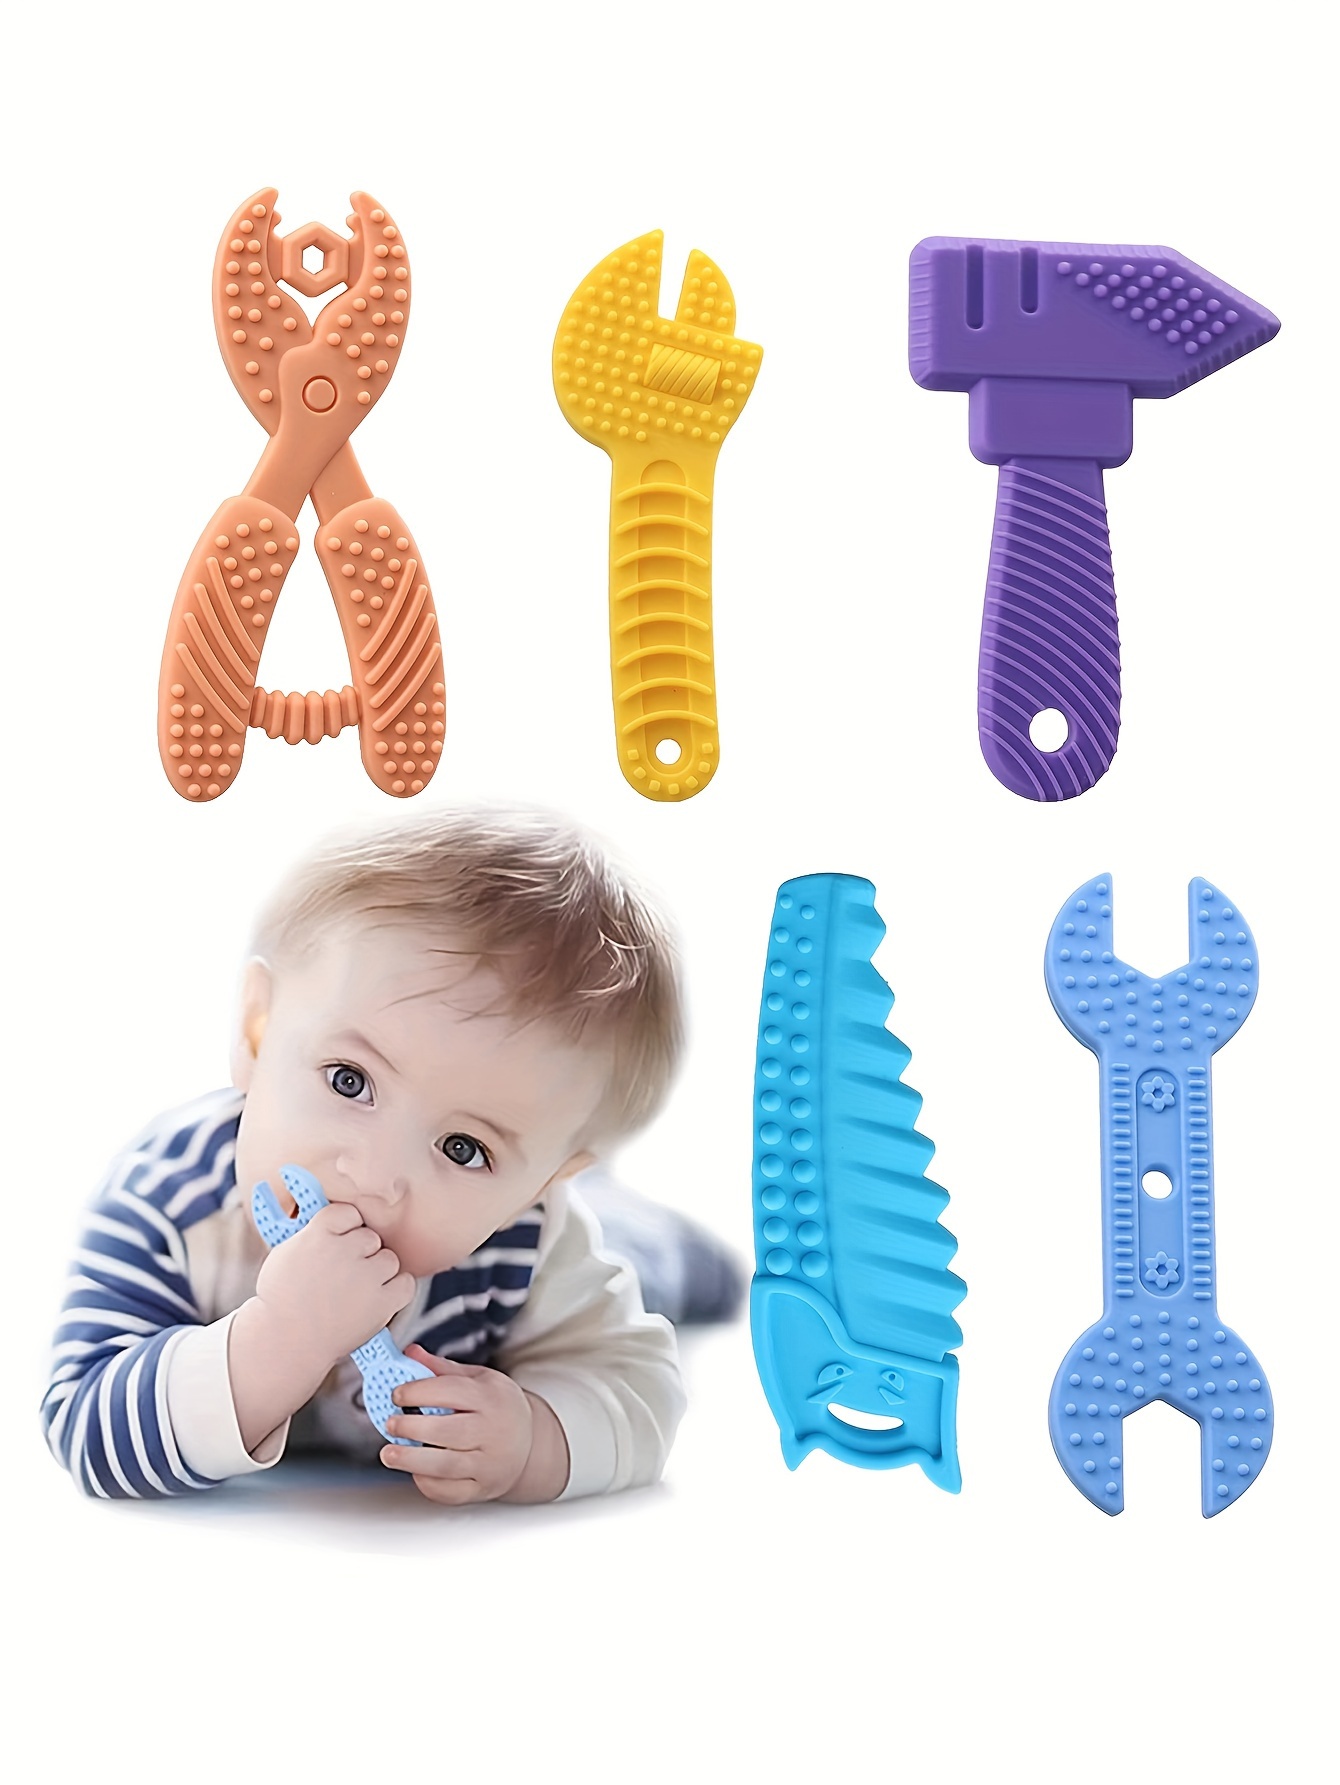 Teething Toys 0-6 Months Babies 6-12 Months, Silicone Baby Teething Toys, Baby  Chew Toys, Teeth Grinder, Hammer Wrench Wrench Pliers Teething Toy